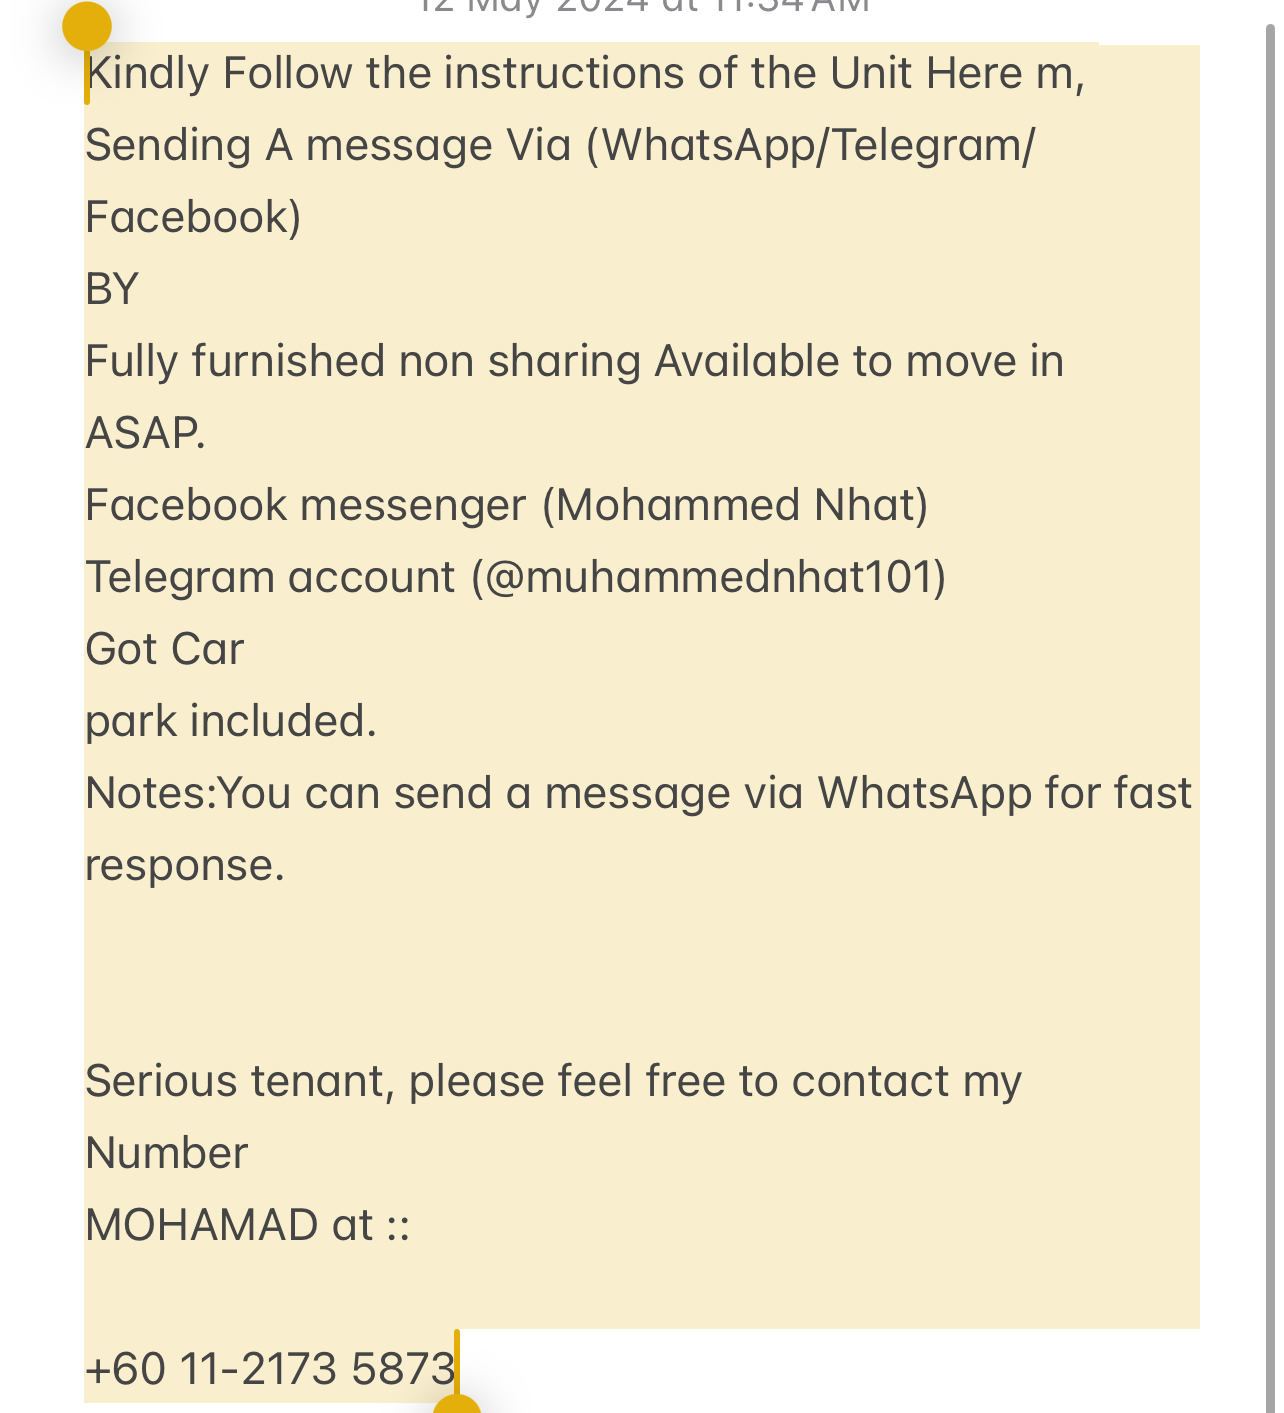 room for rent, master room, jalan pju 8/8, Send the owner a message on WhatsApp/facebook if you want to RENT the unit facebook (Mohammed Nhat)&Telegram(@muhammednhat101) Fully furnished non sharing :(comfortable)